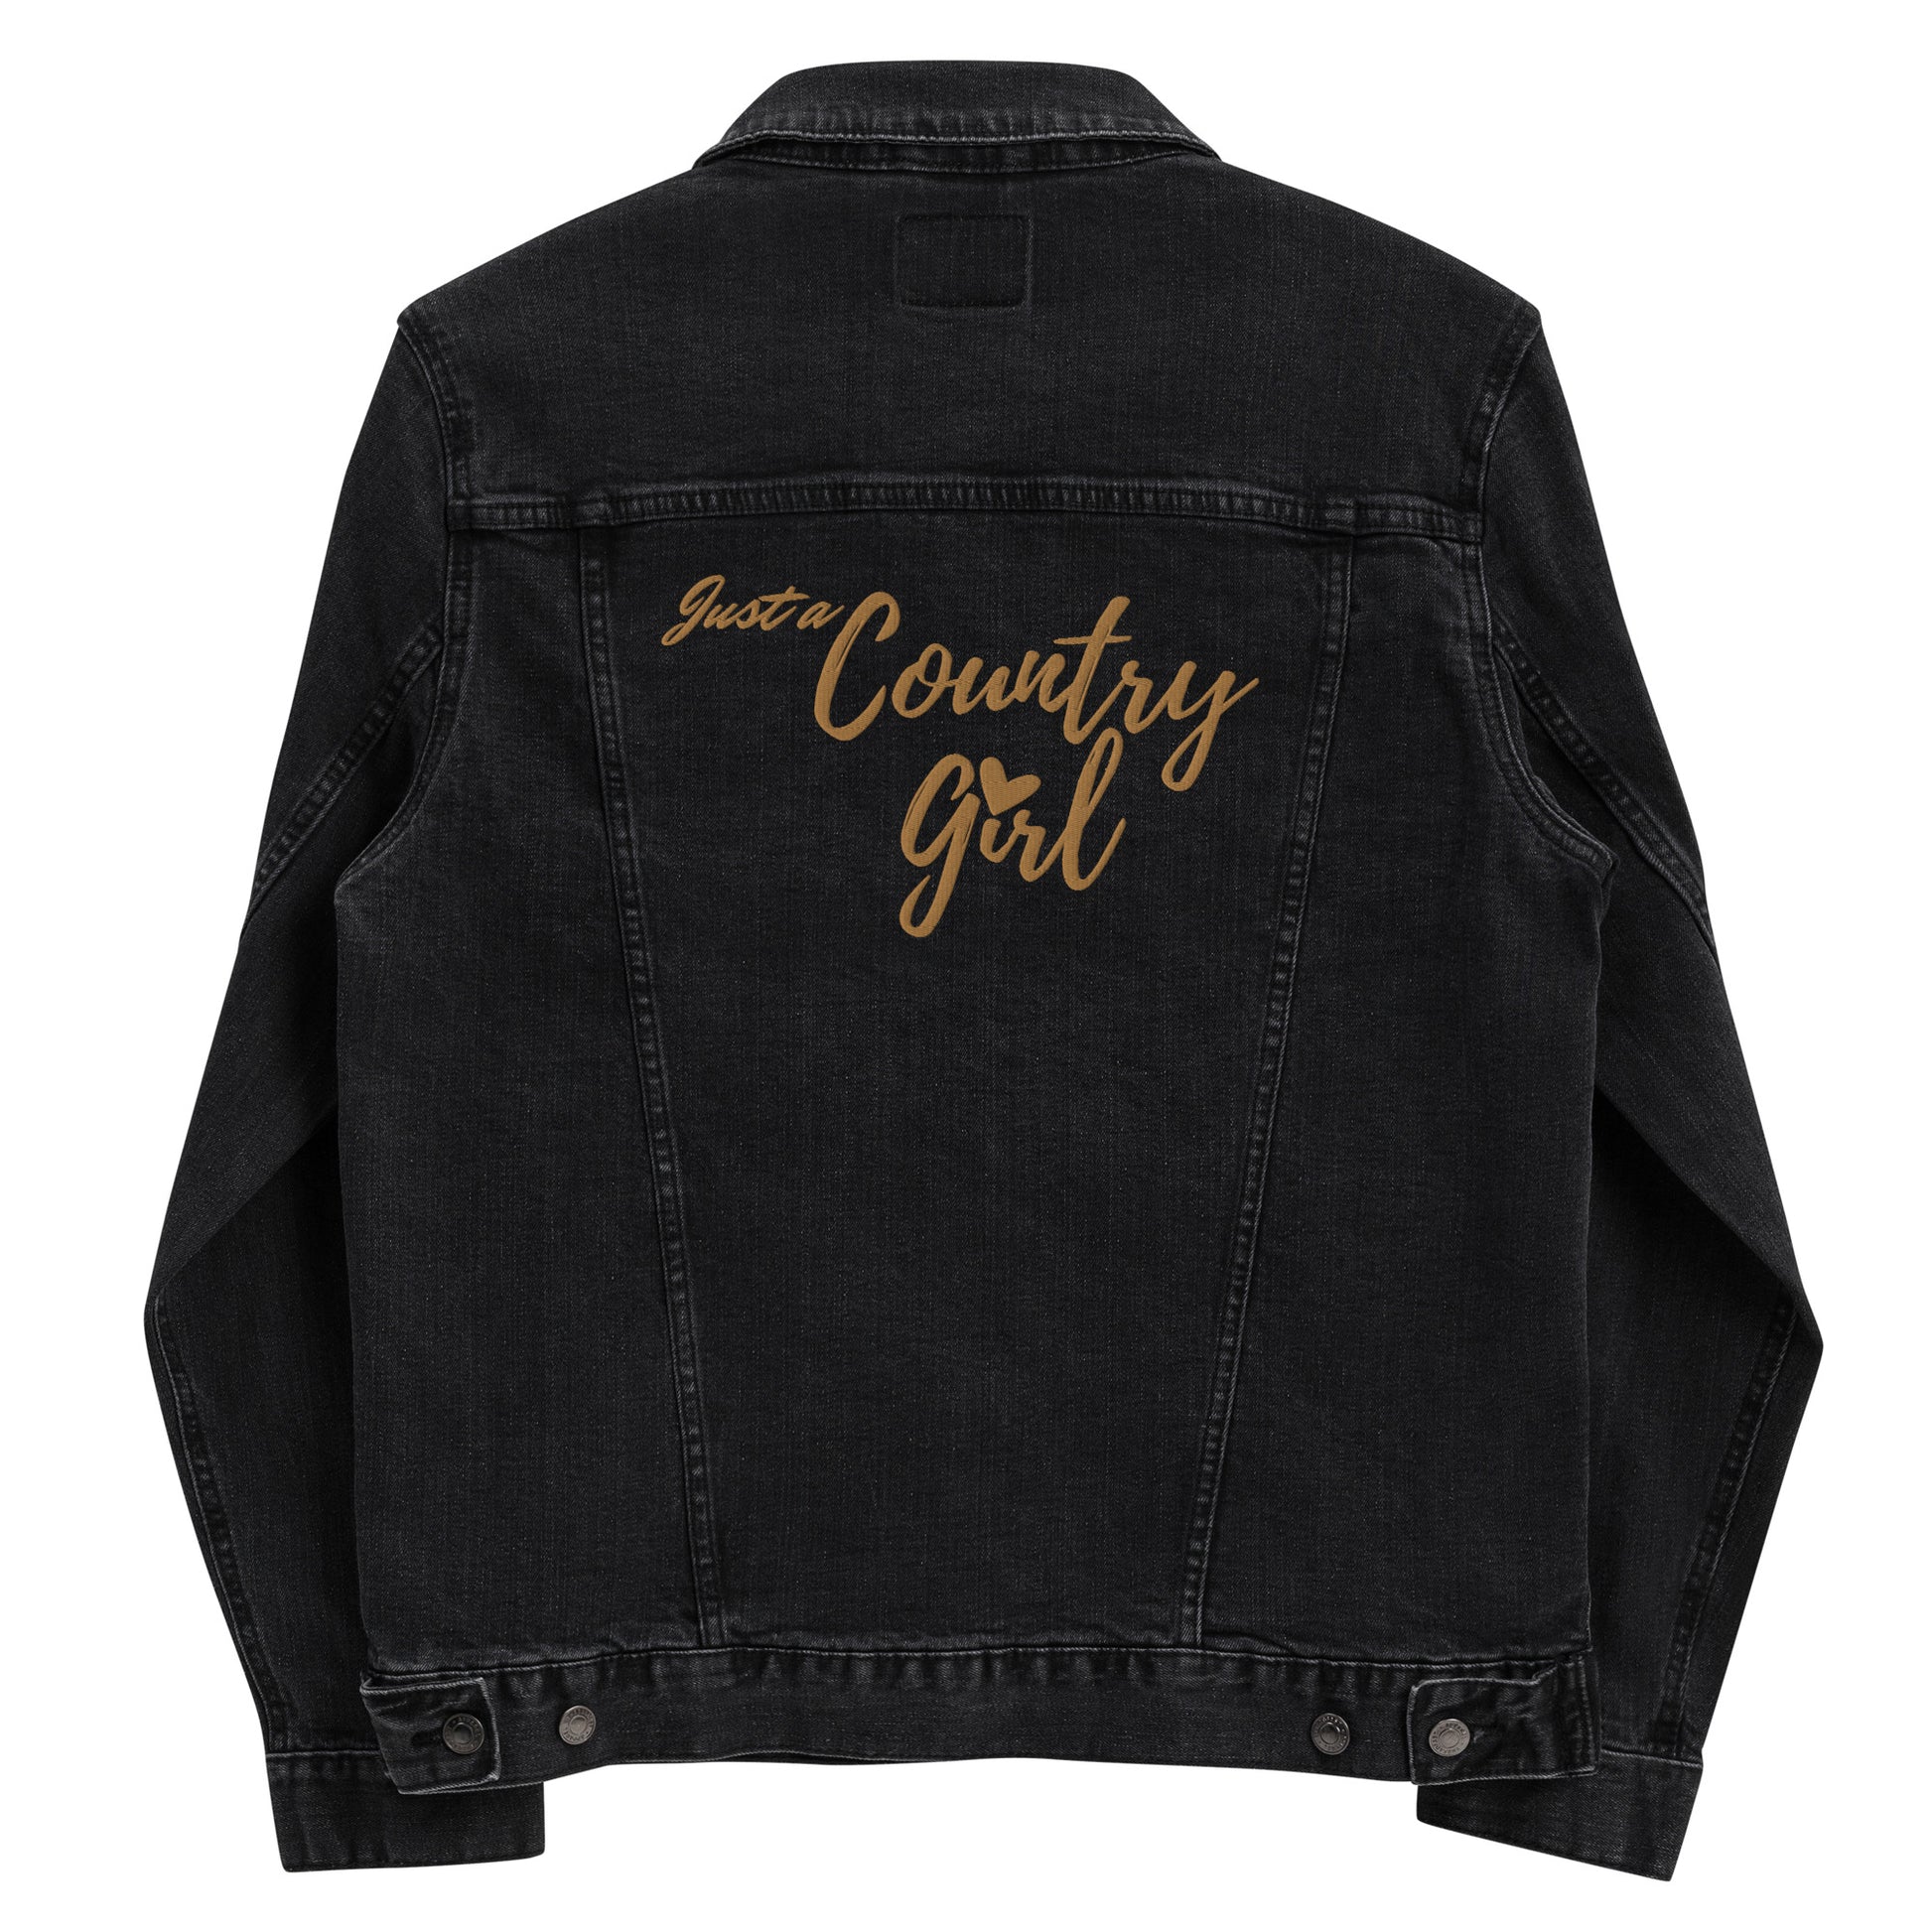 Back view of a black denim jacket embroidered across the back with the words Just a Country Girl.